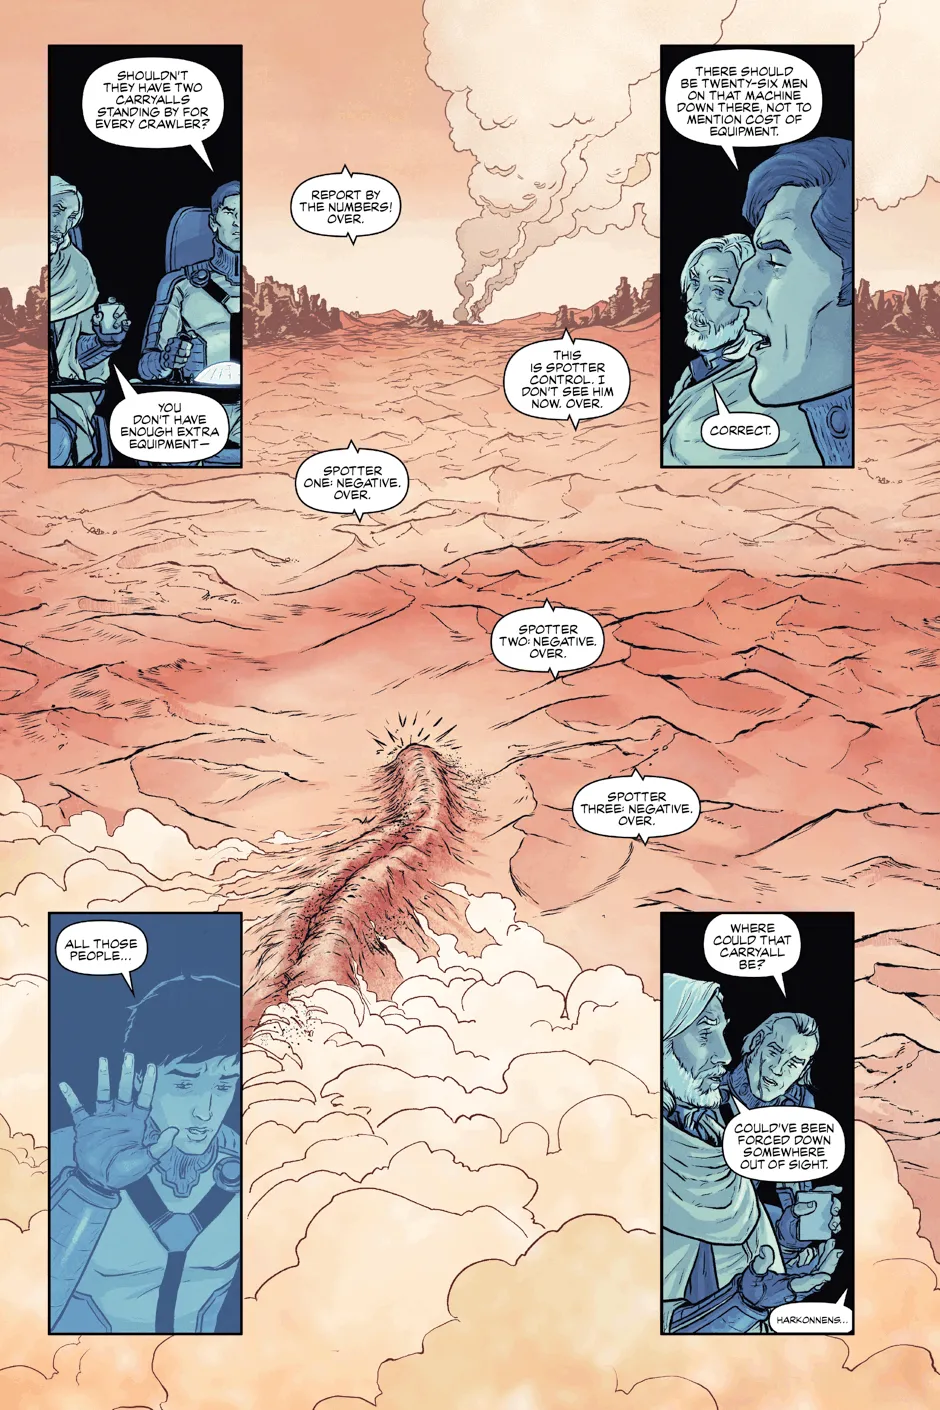 Page 82 of Dune: The Graphic Novel, adapted by Brian Herbert and Kevin J. Anderson, illustrated by Raúl Allen and Patricia Martín, published by Abrams ComicArts © 2020 Herbert Properties LLC